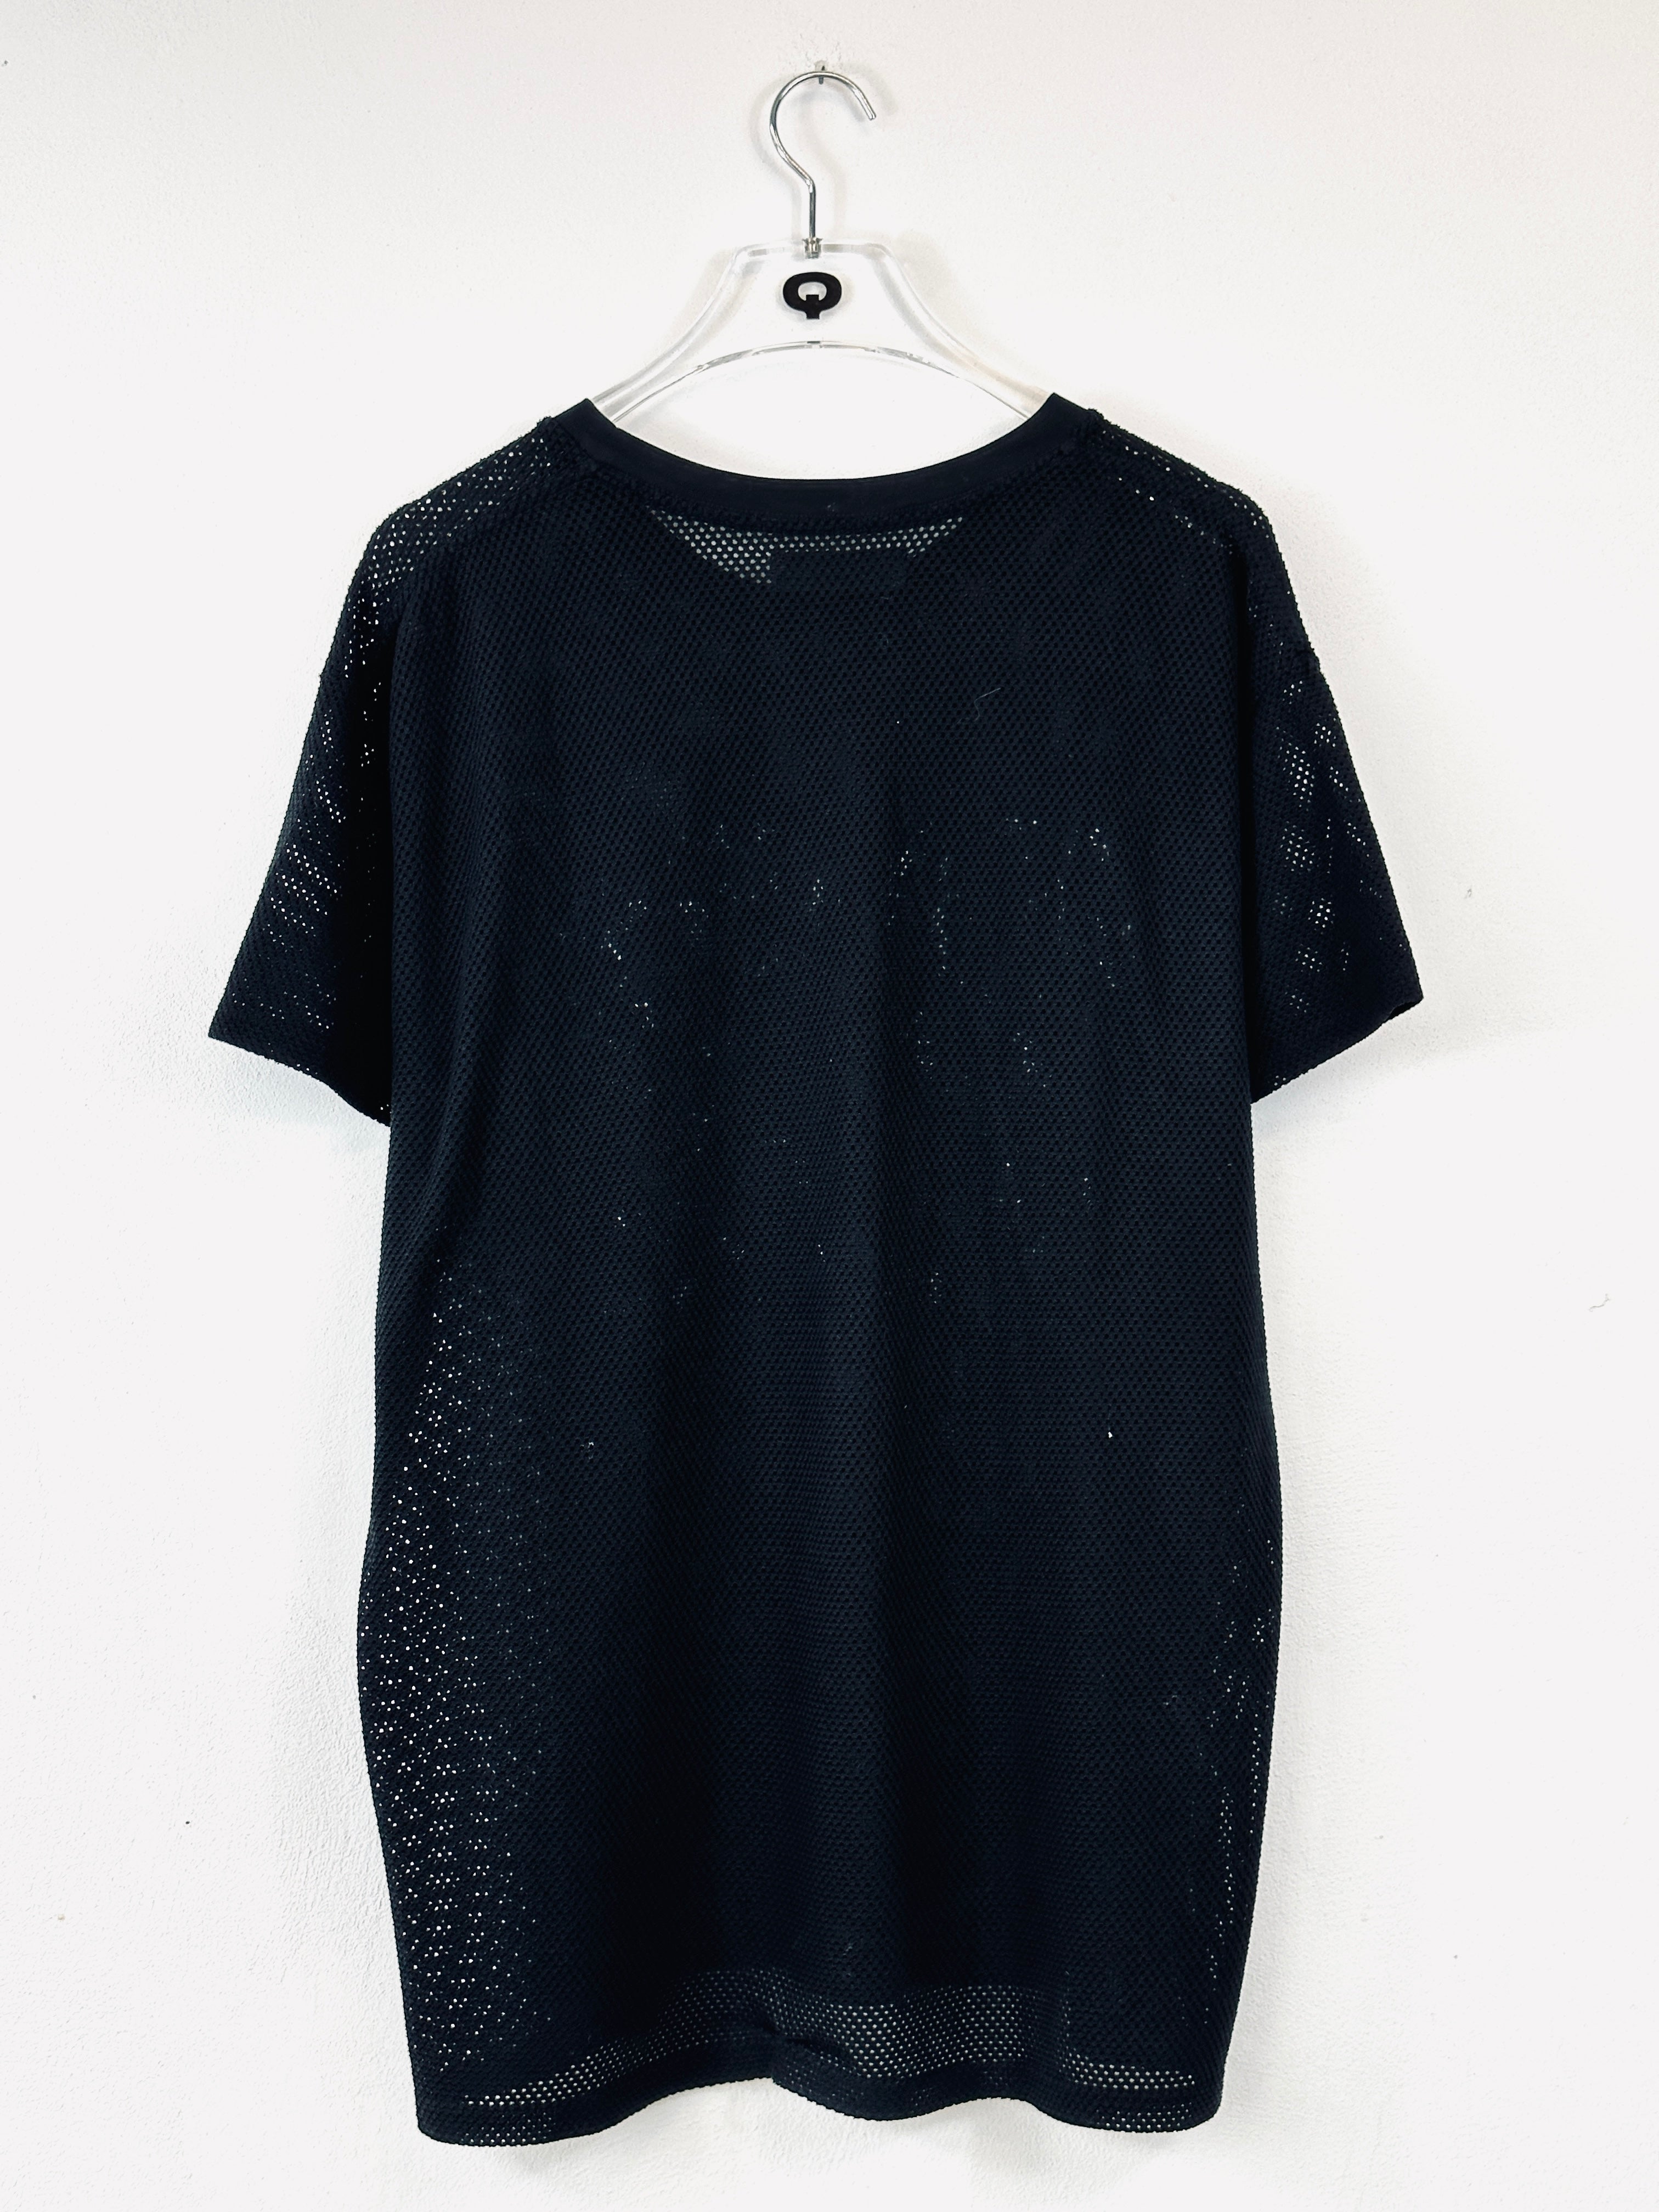 Perforated T-shirt